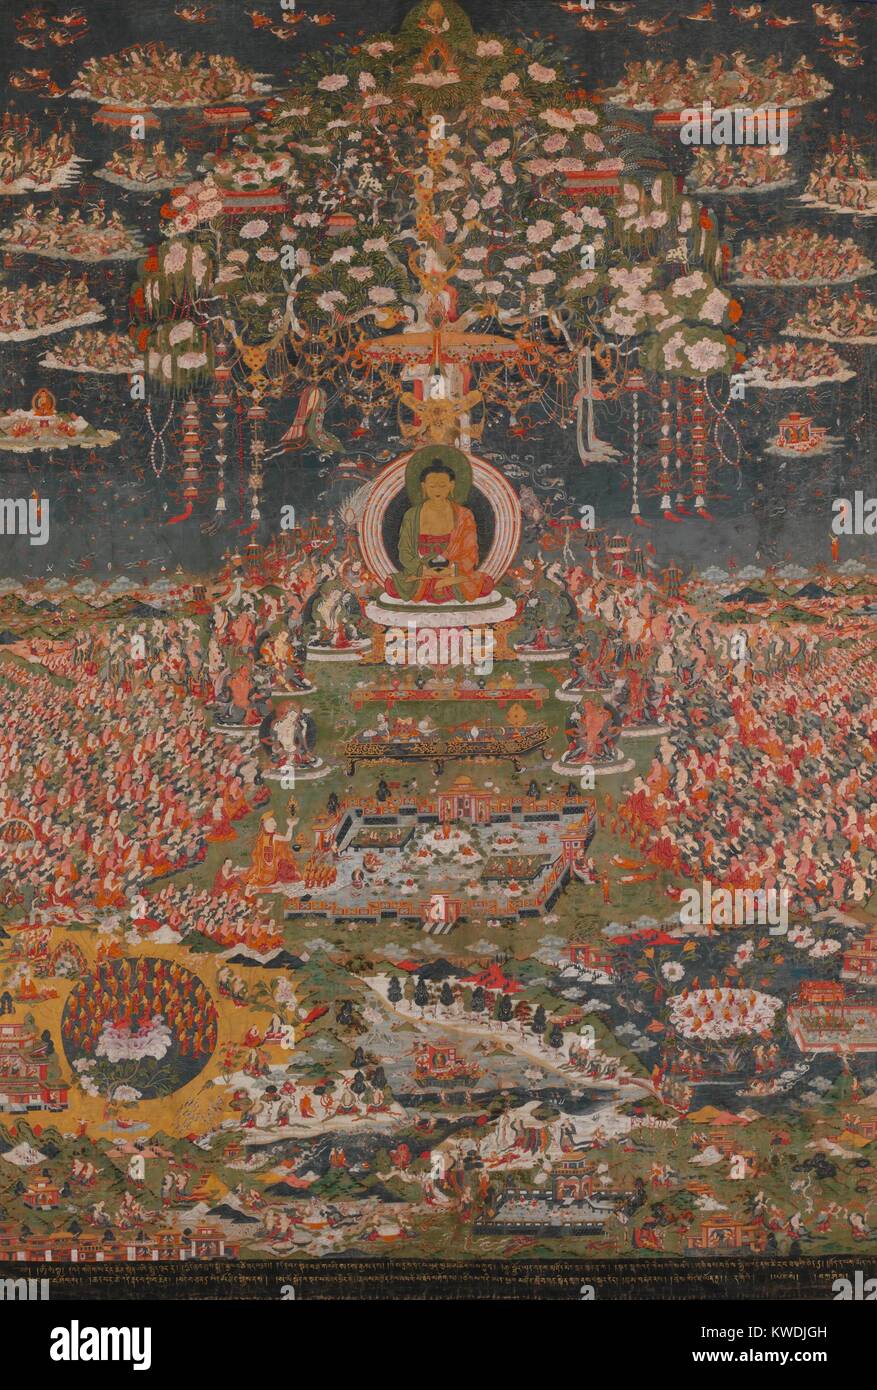 AMITABHA, THE BUDDHA OF THE WESTERN PURE LAND, Tibetan, Buddhist, 18th c., painting. Amitayus, the Buddha of Eternal Life, in his paradise, Sukhavati, the Western Pure Land. The sky is filled with demigods who scatter flowers. Just below Amitayus are the eight great bodhisattvas. In bottom landscape are pools from which the purified are reborn (BSLOC 2017 16 13) Stock Photo